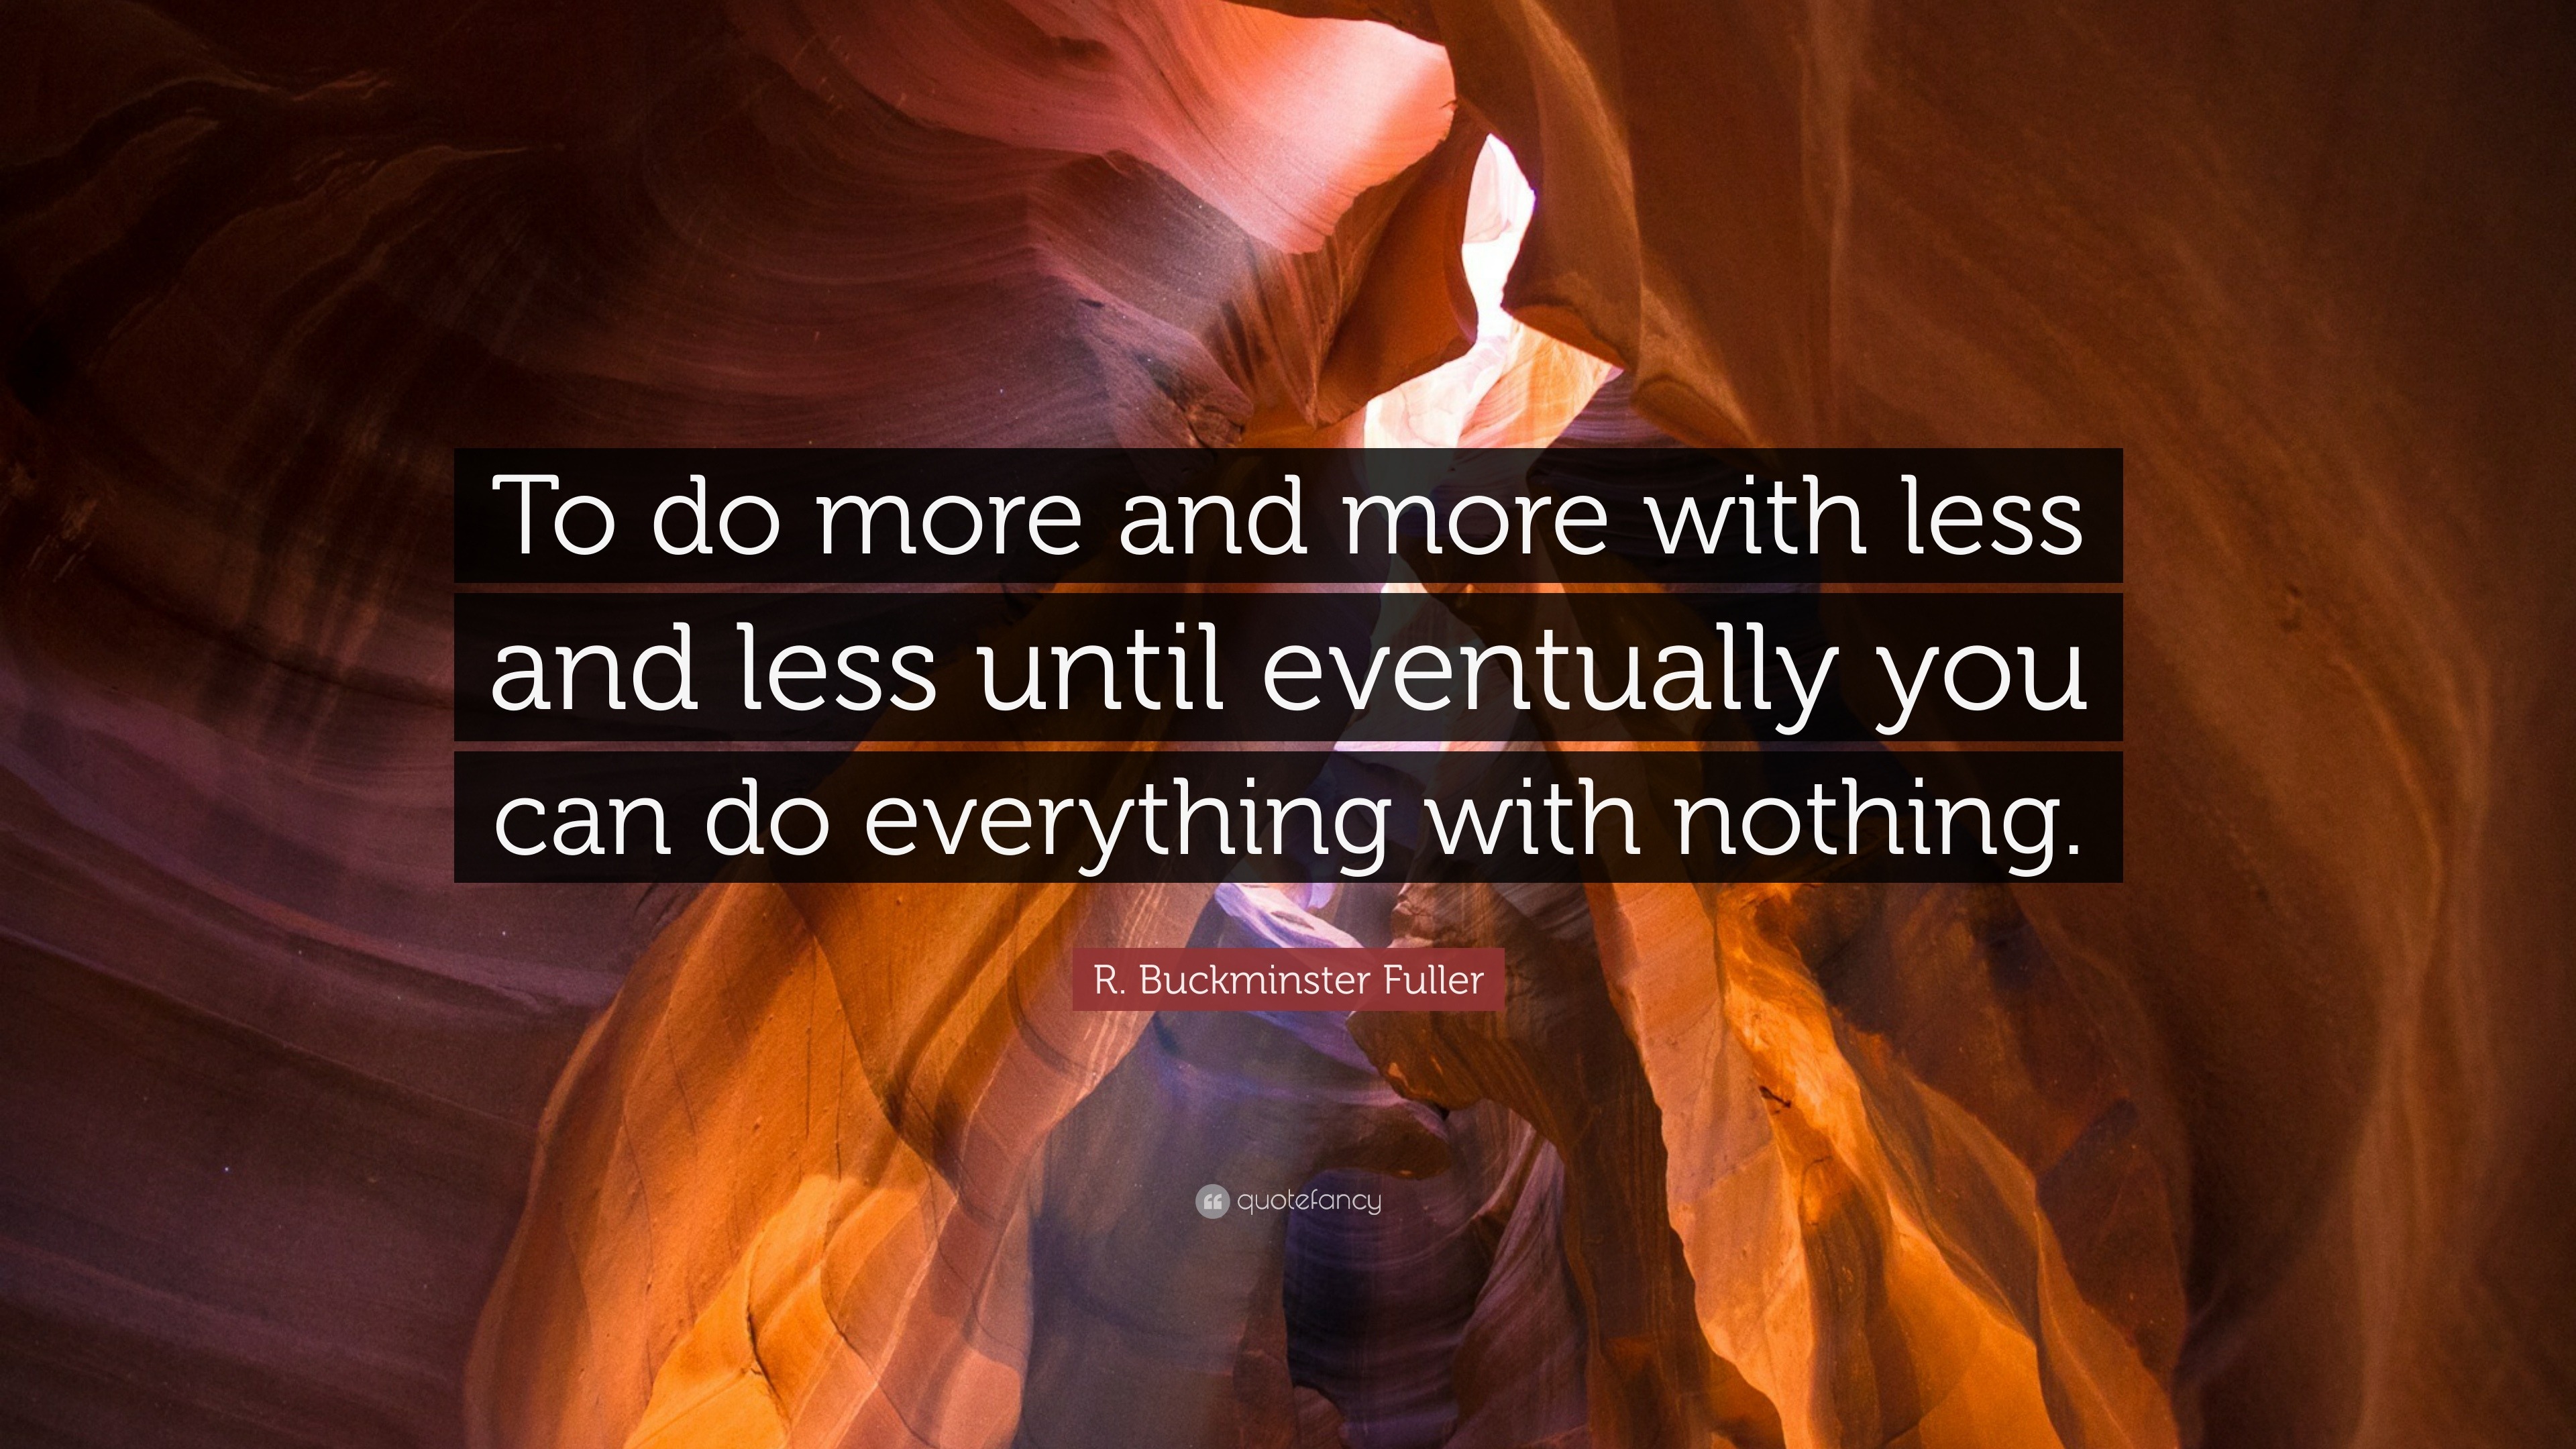 to do more and more with less and less until eventually you can